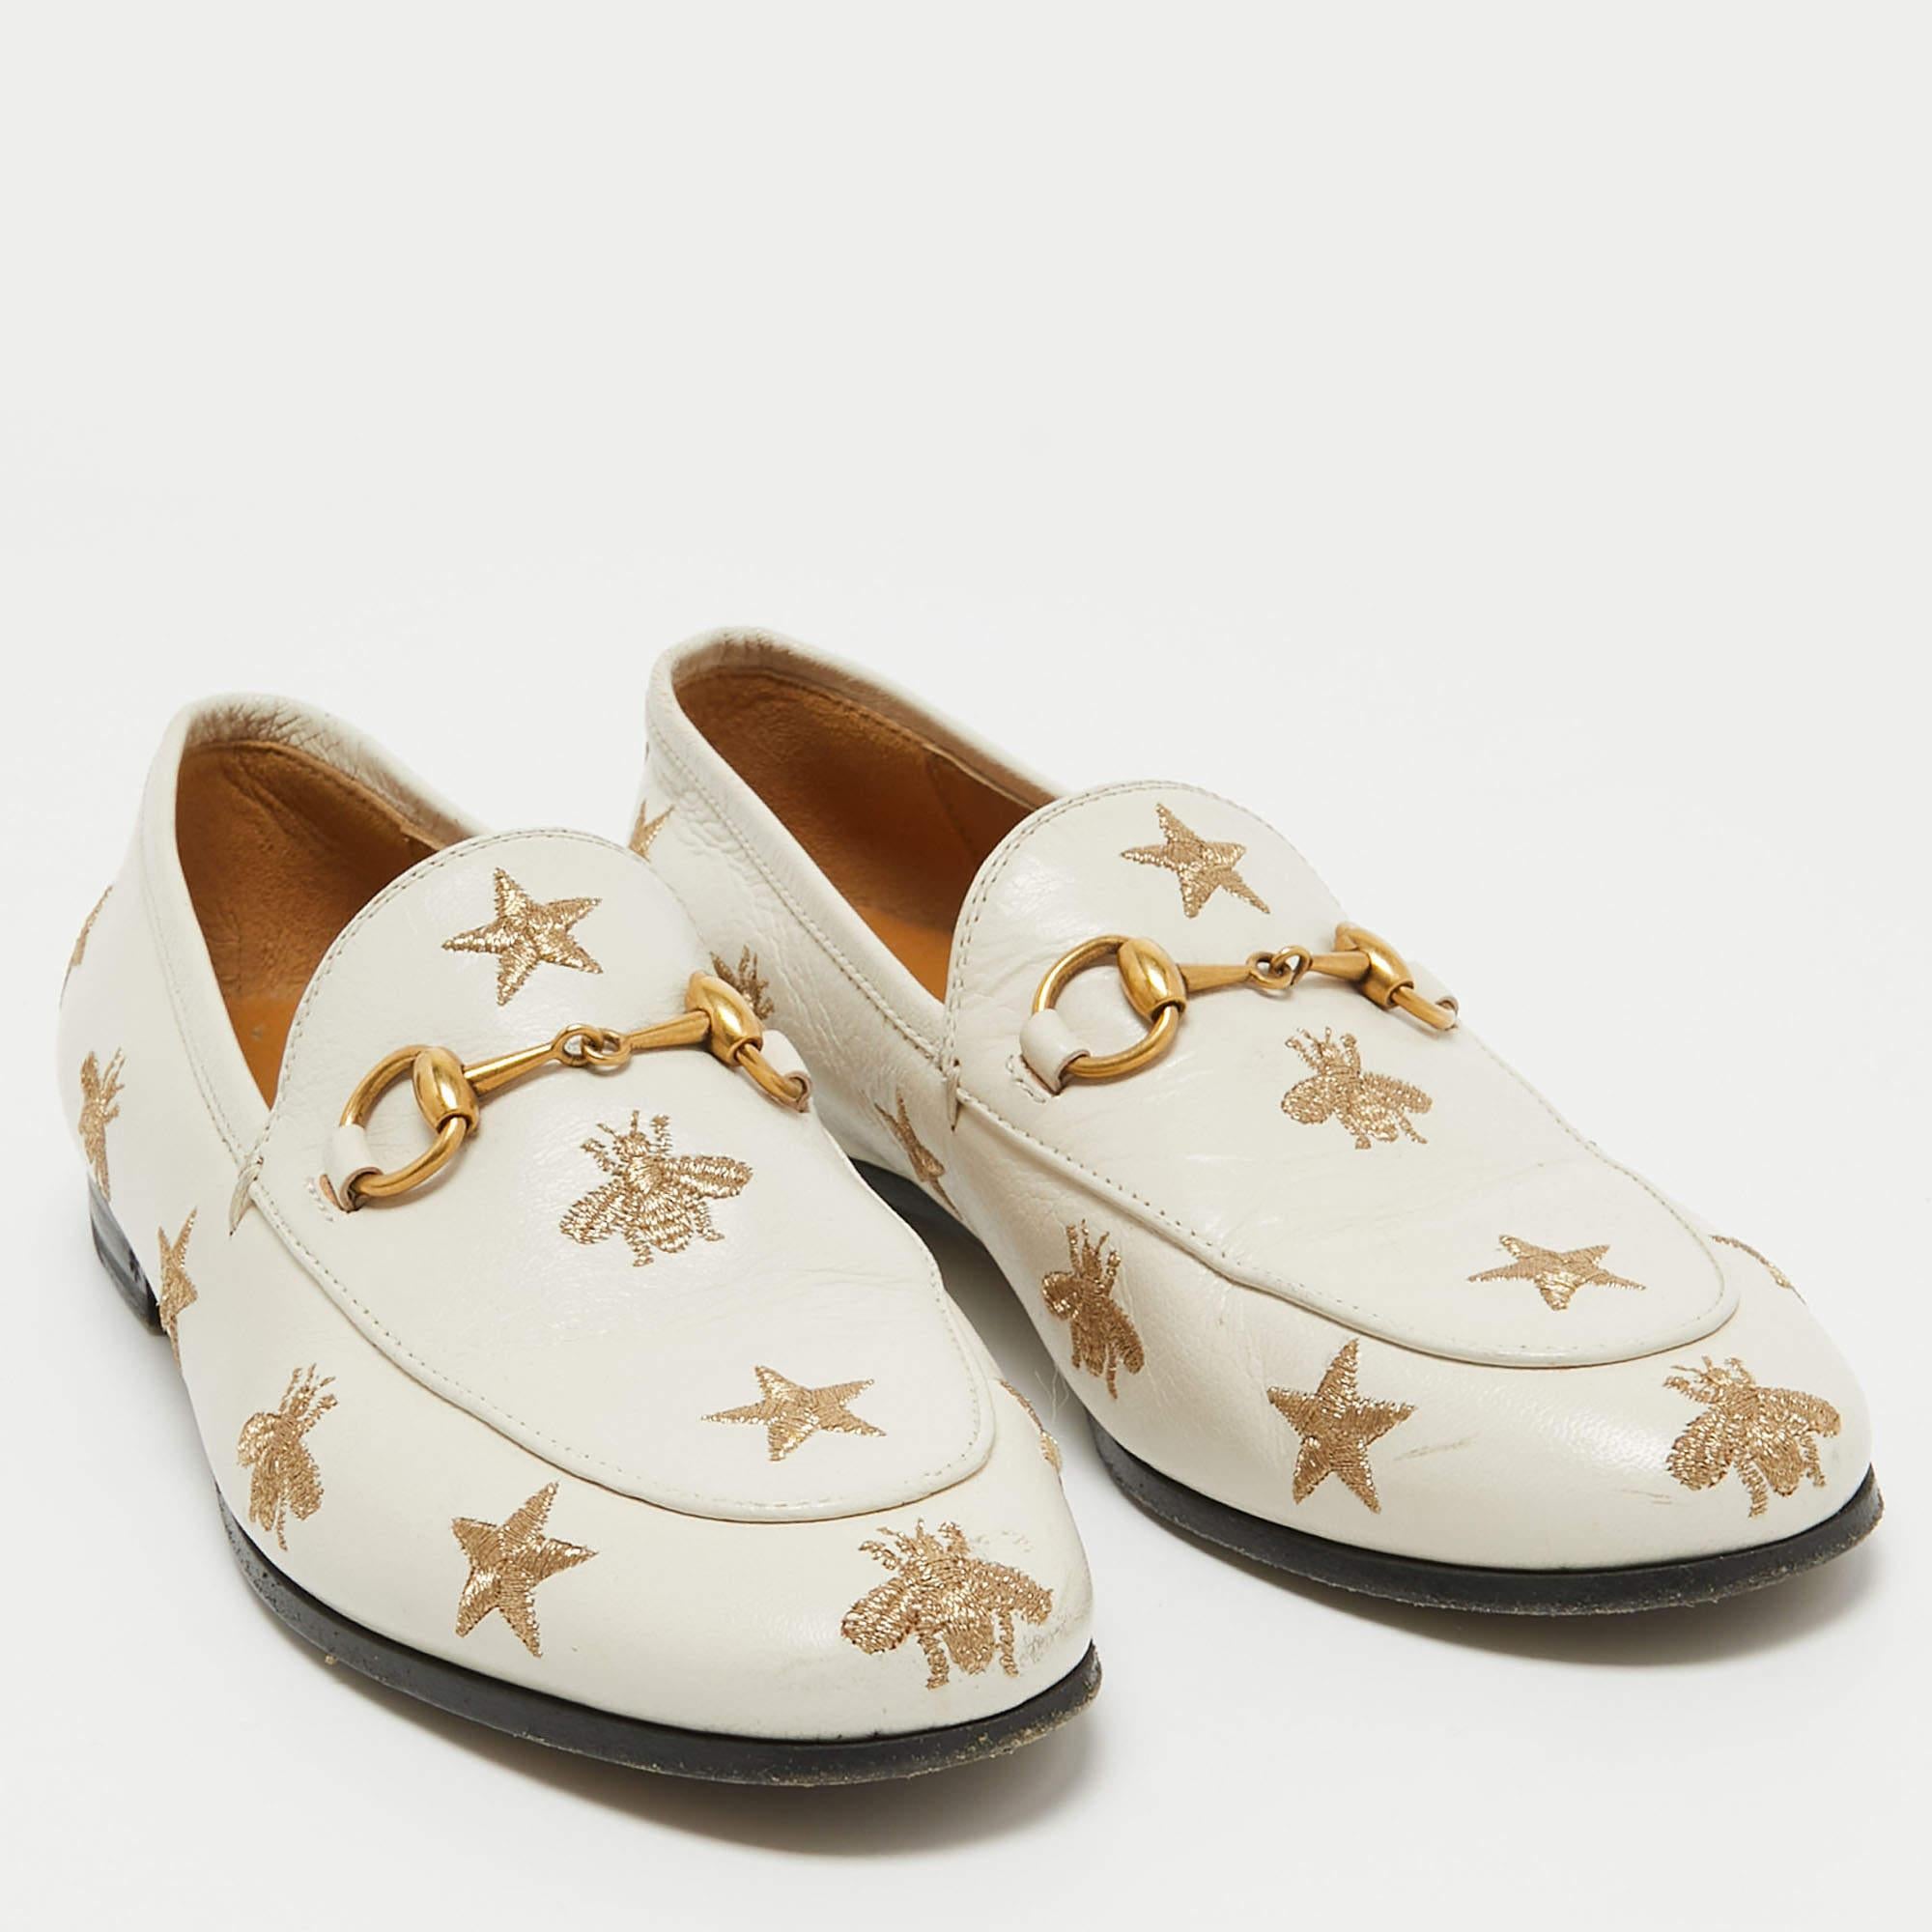 Gucci Cream Leather Jordaan Embroidered Bee Horsebit Slip On Loafers Size 35 For Sale 2